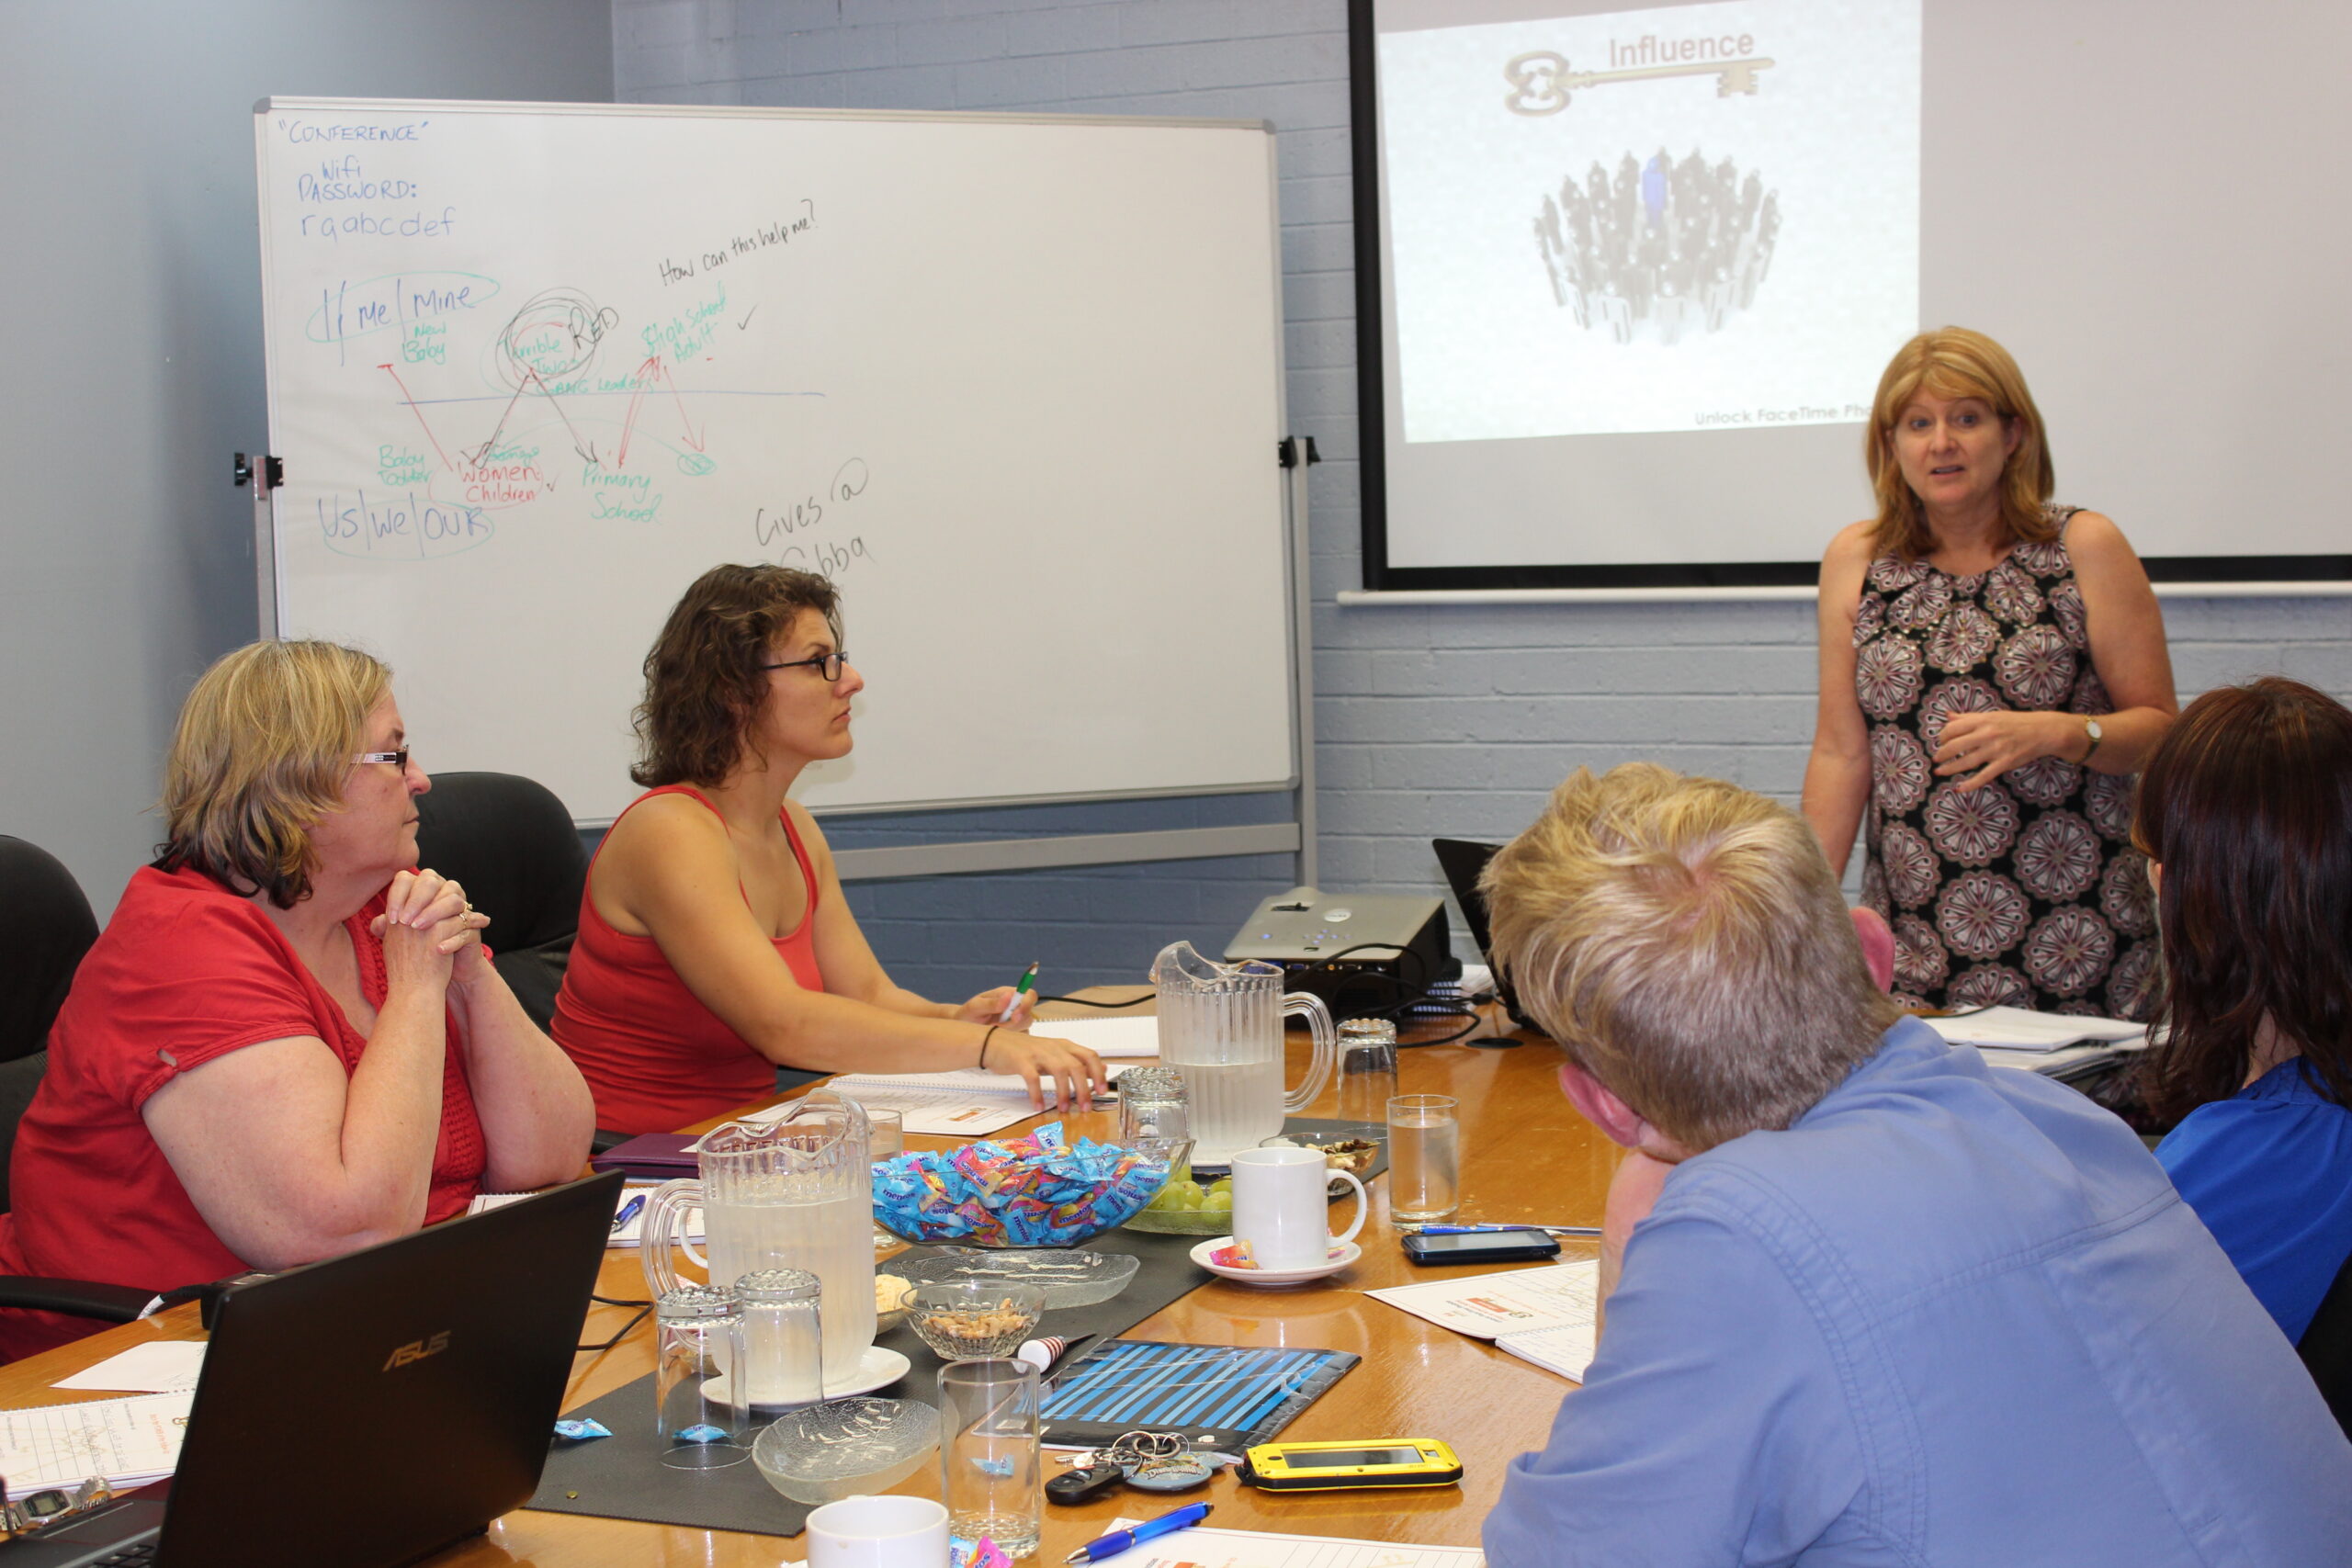 an image of Janeen conducting personal brand authority coaching training to a small group of business people